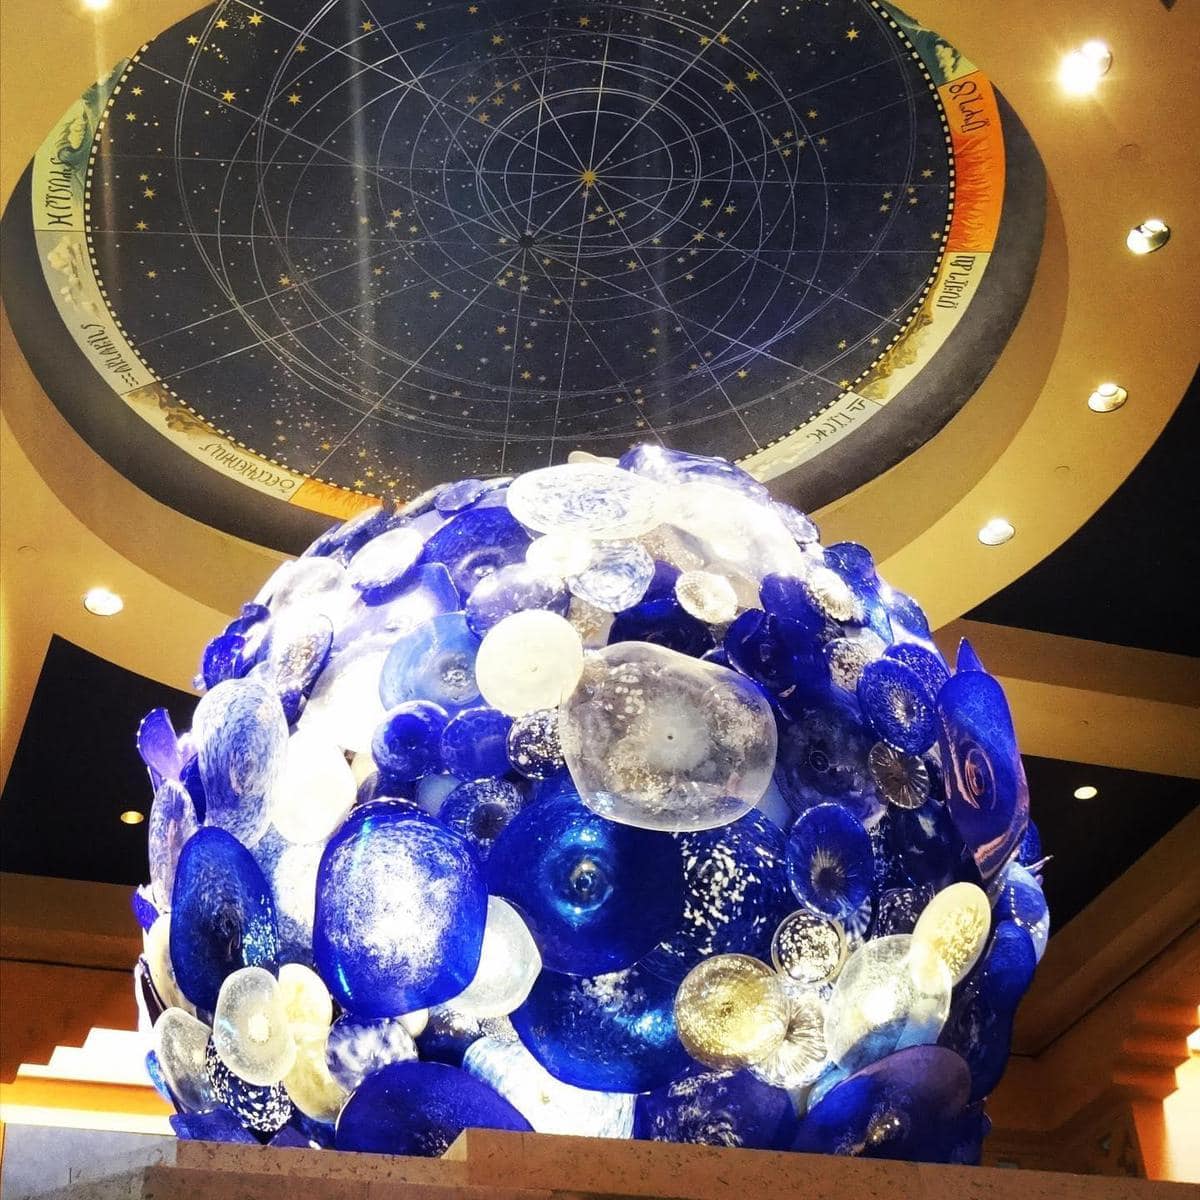 Dale Chihuly glass sculpture at Atlantis Casino